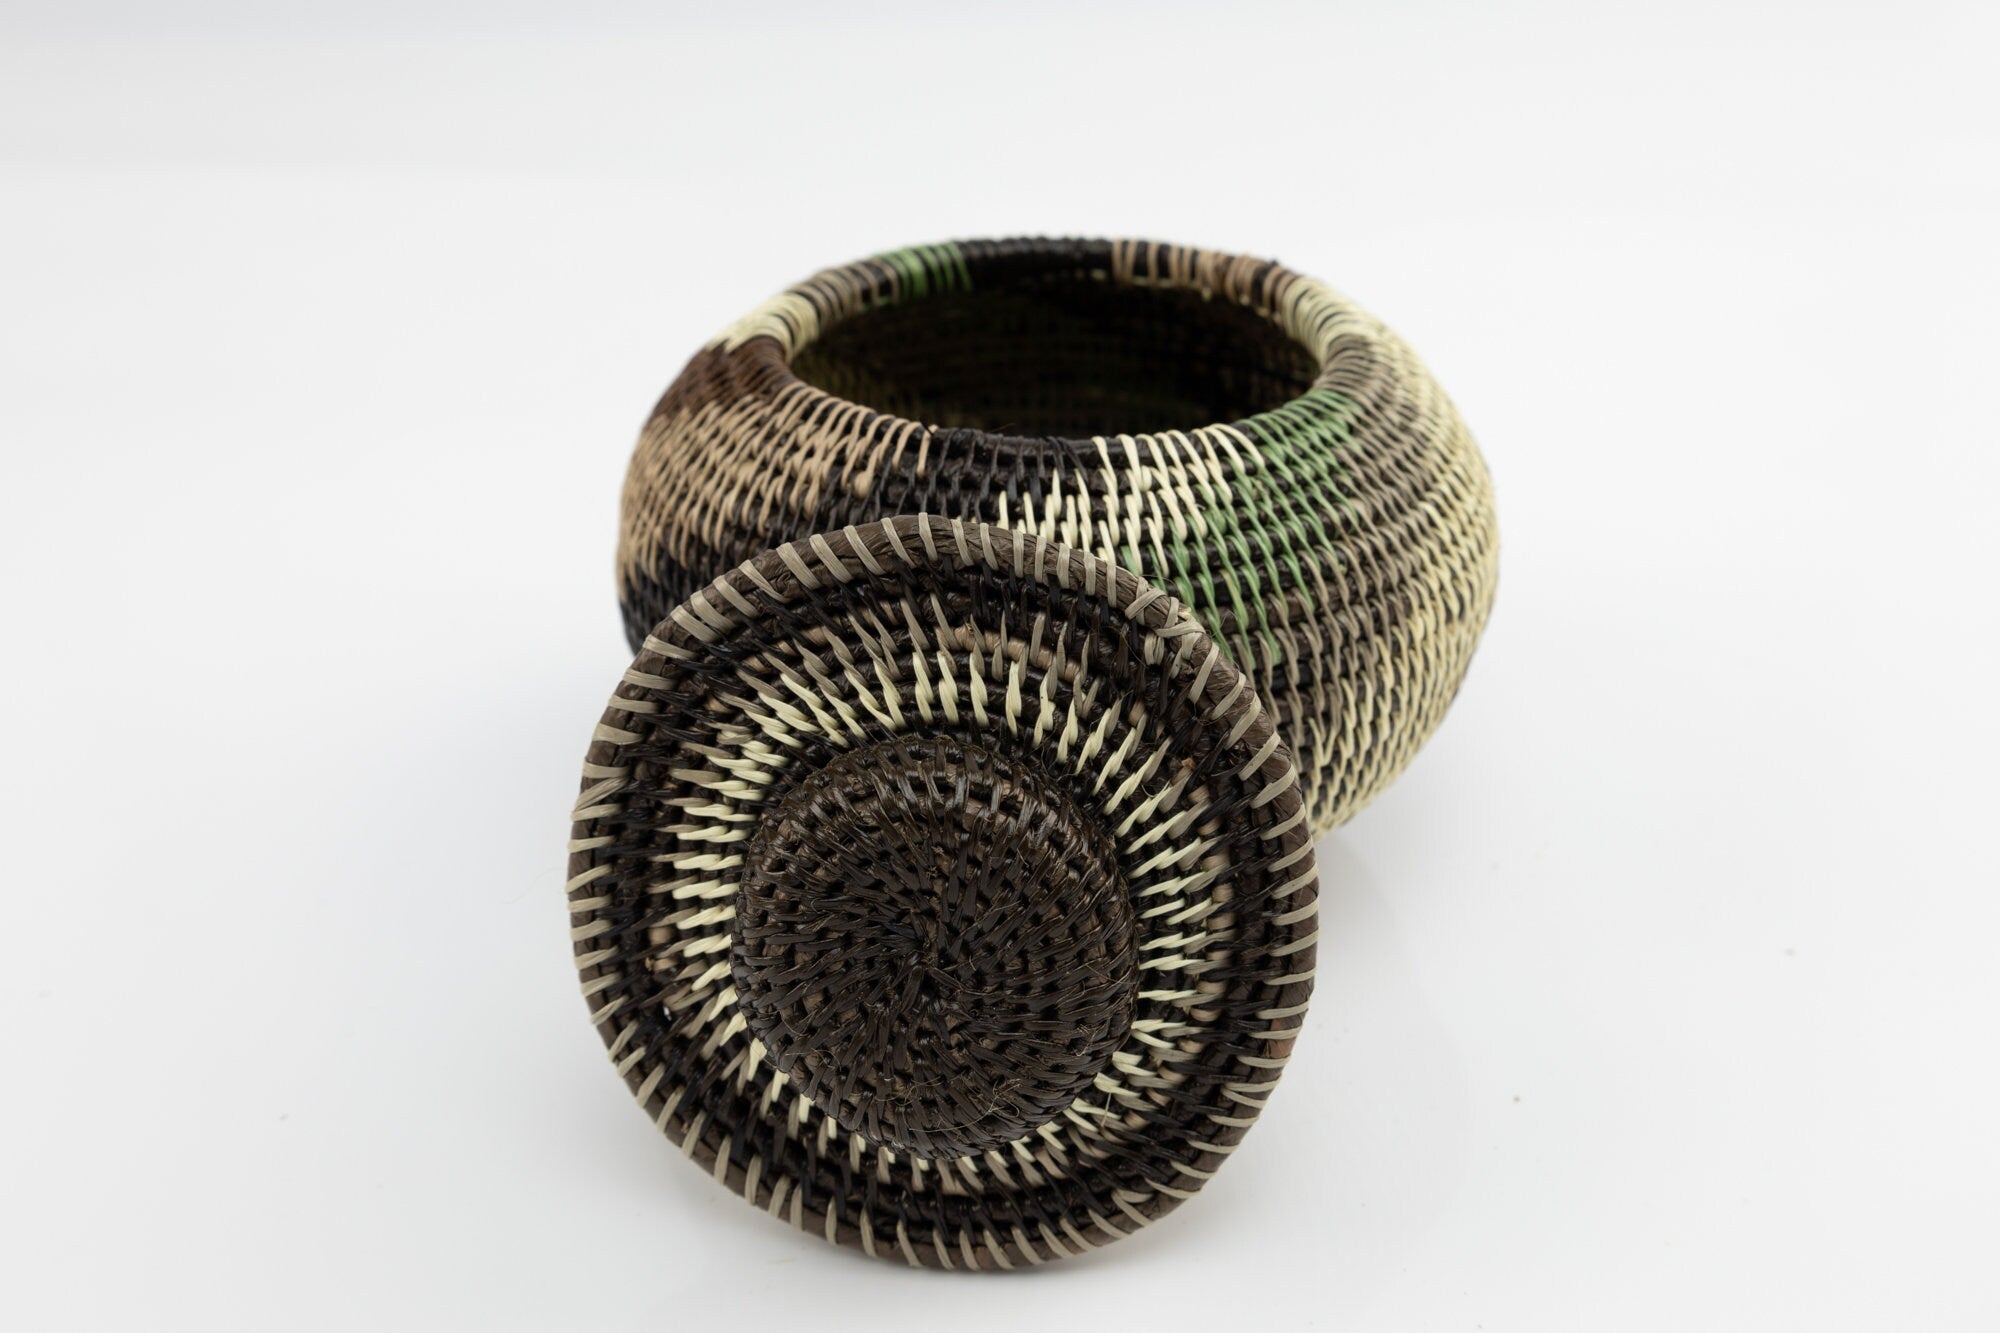 Hand Woven Swirl Design basket with Top Made By Wounaan And Emberá Panama Indians. Bowl Basket, Woven Basket, Basket Decor, Woven Storage